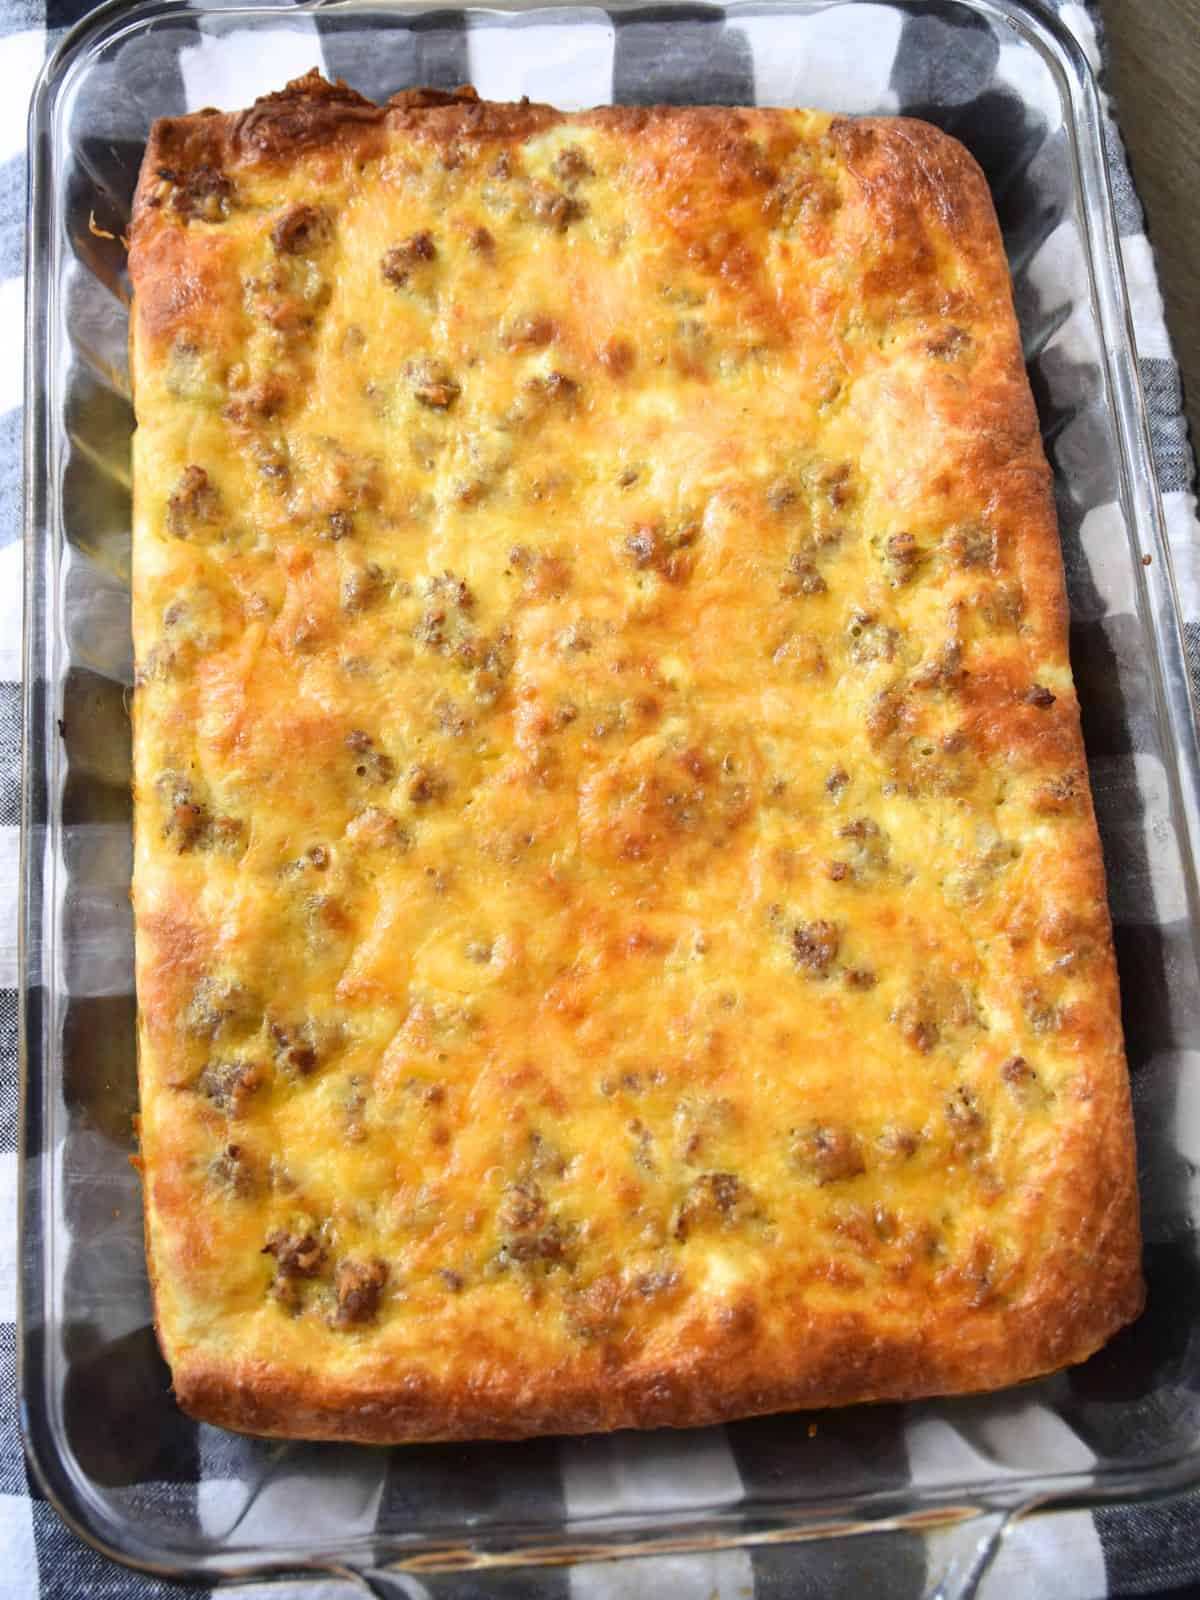 breakfast casserole with sausage in baking dish.